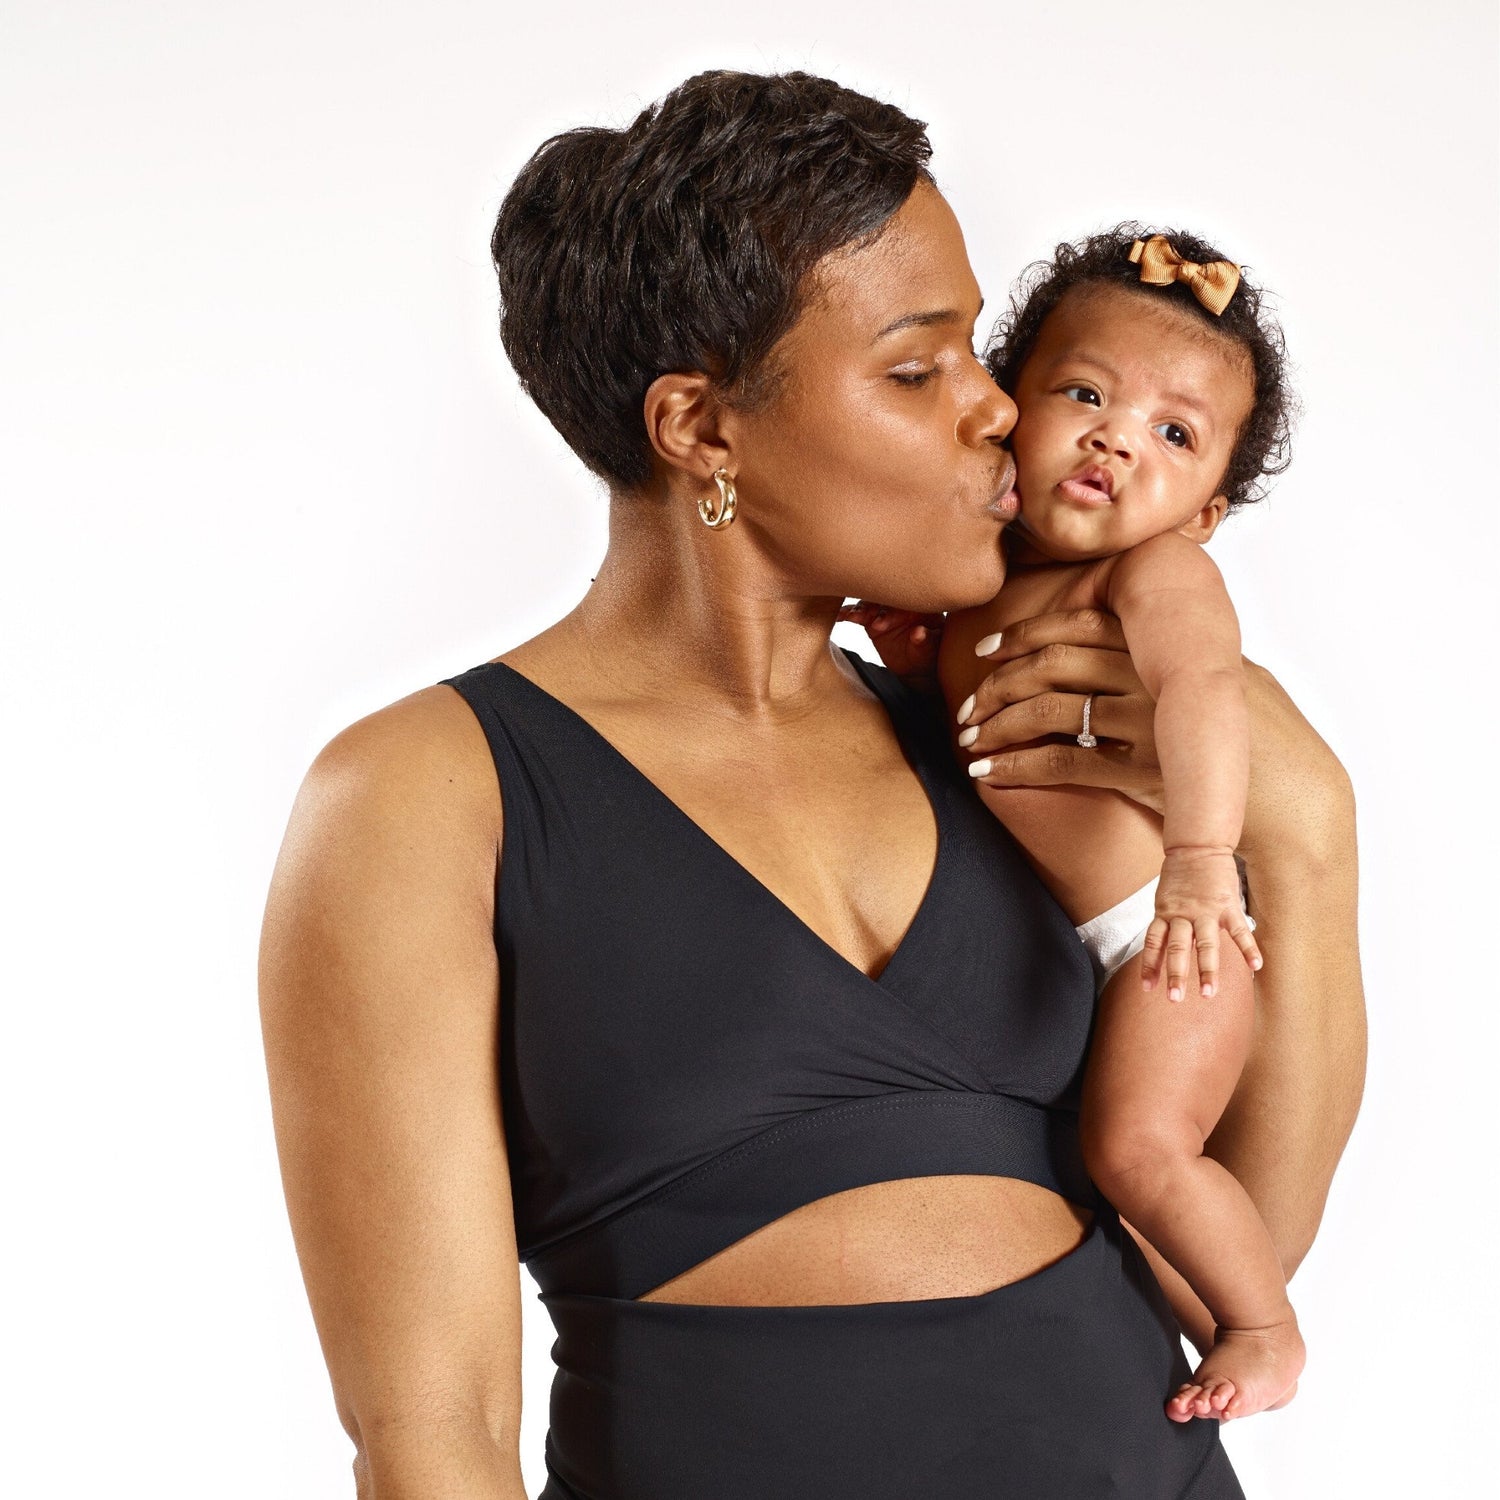 Woman with baby in FourthWear Postpartum Recovery Bralette